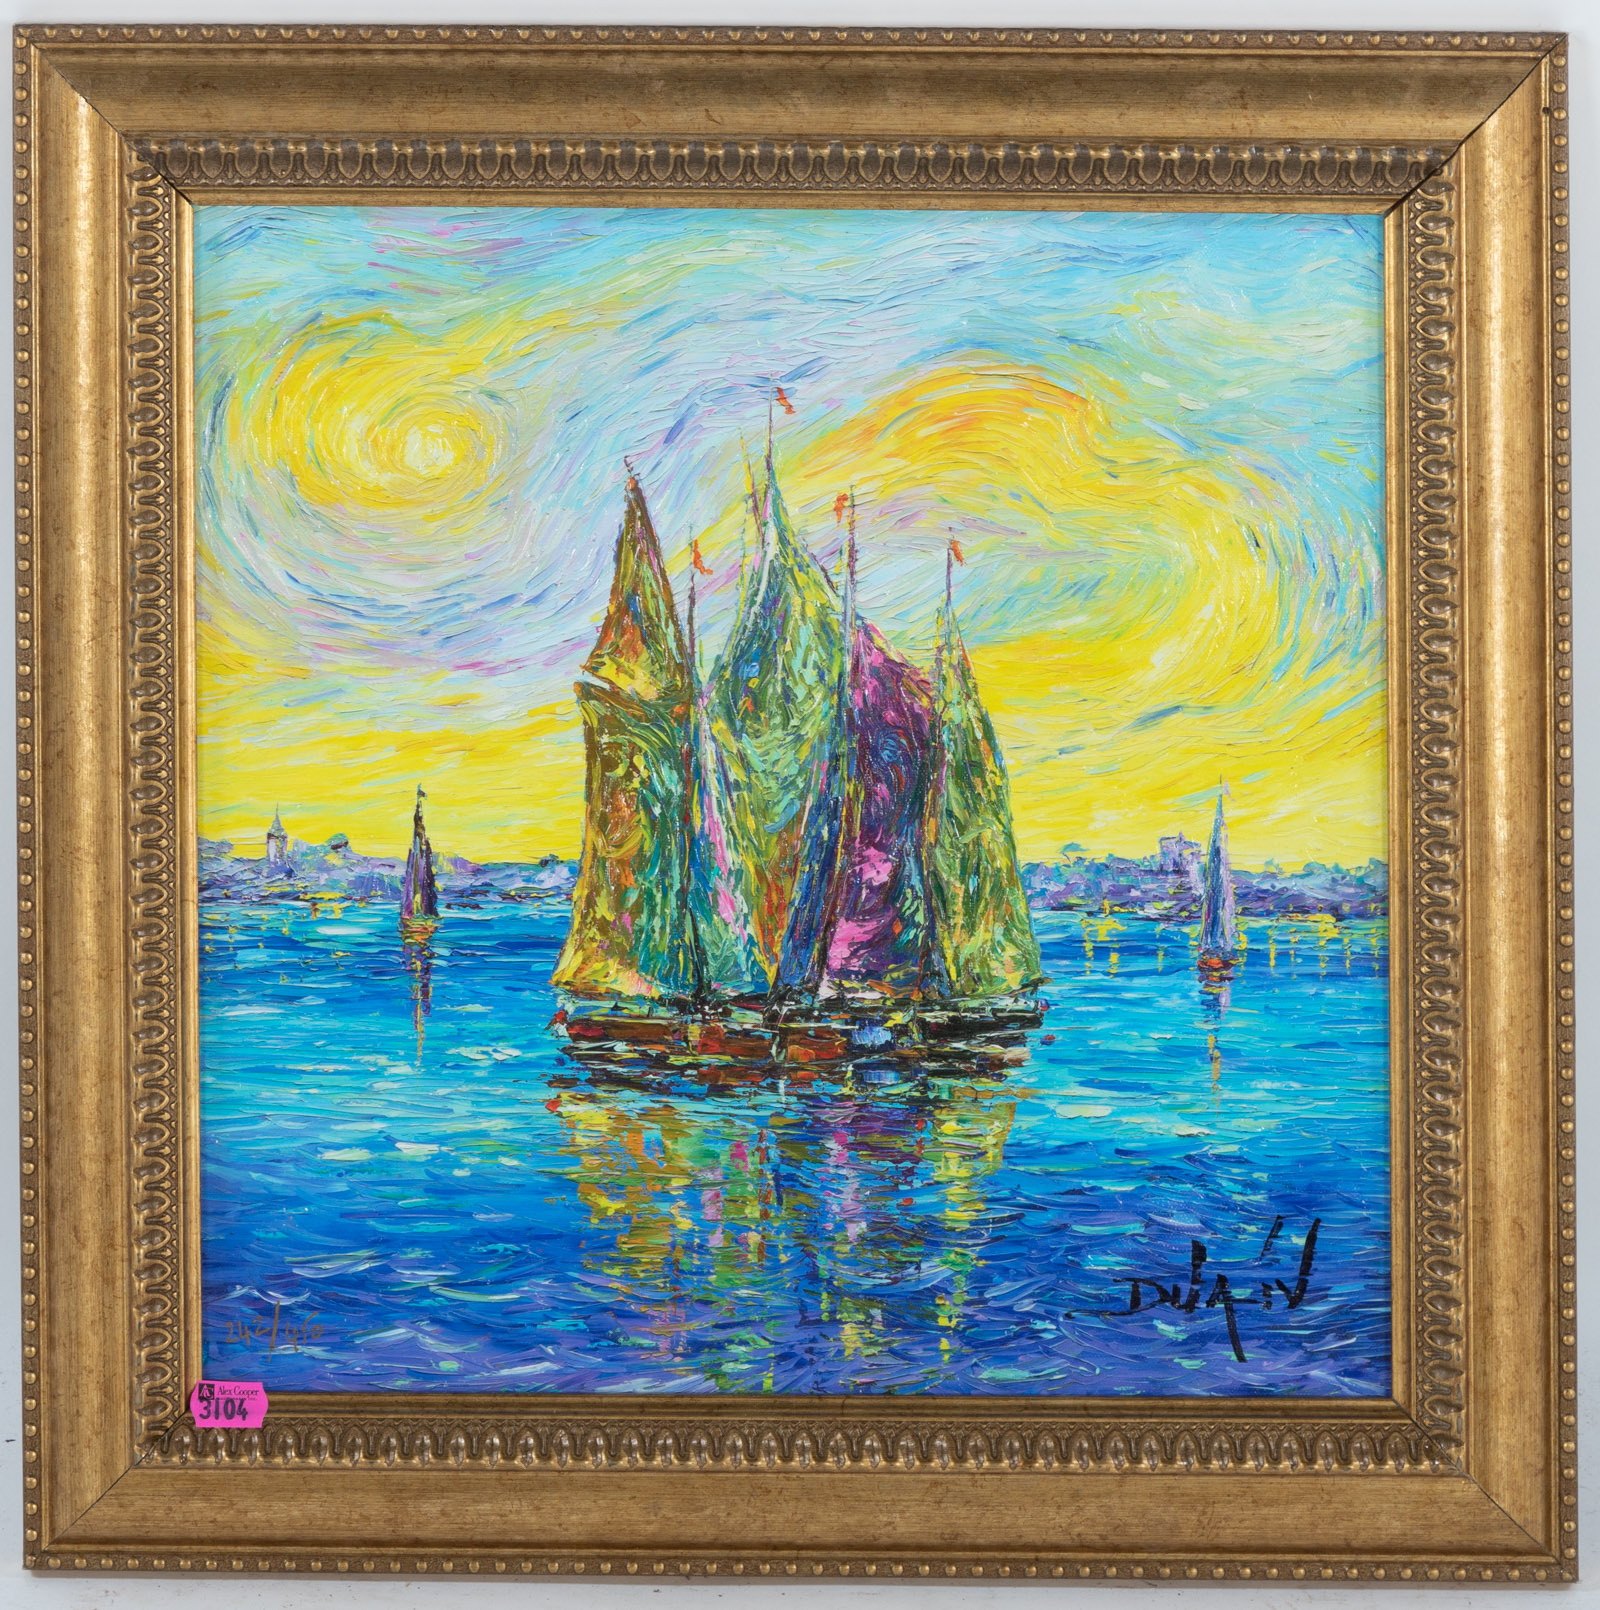 DUAIV BOATS IN THE HARBOR GICLEE 2e8dc5